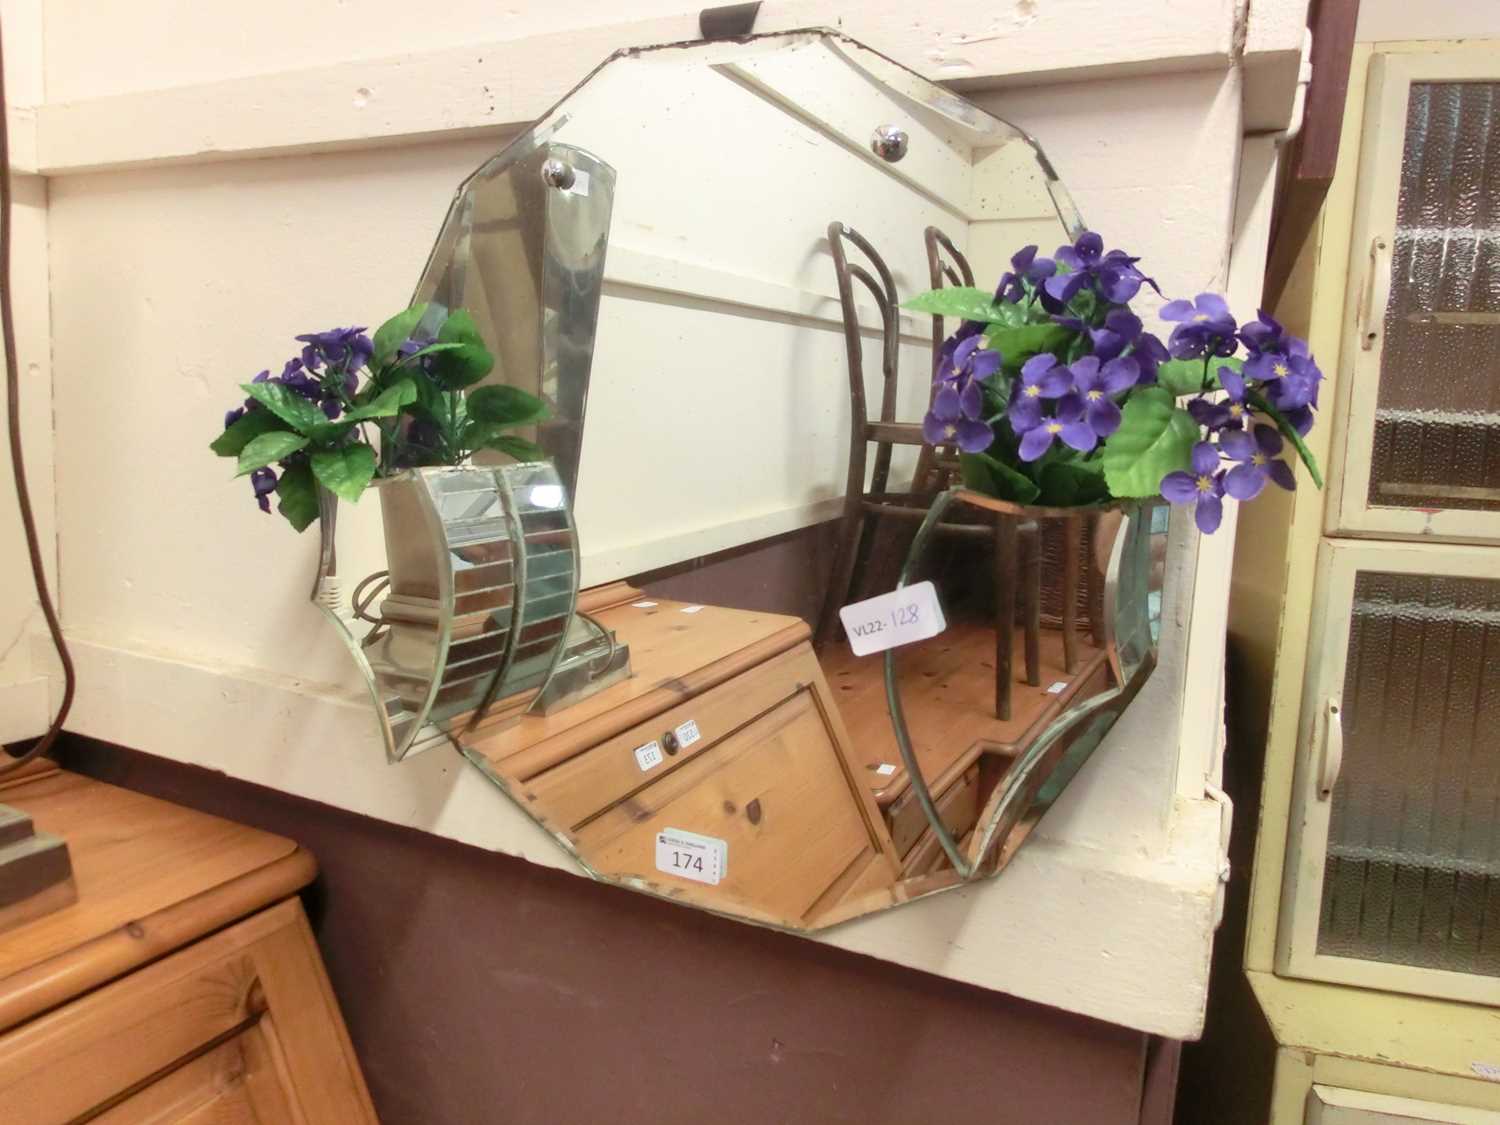 A mid-20th century frameless mirror with attached planters